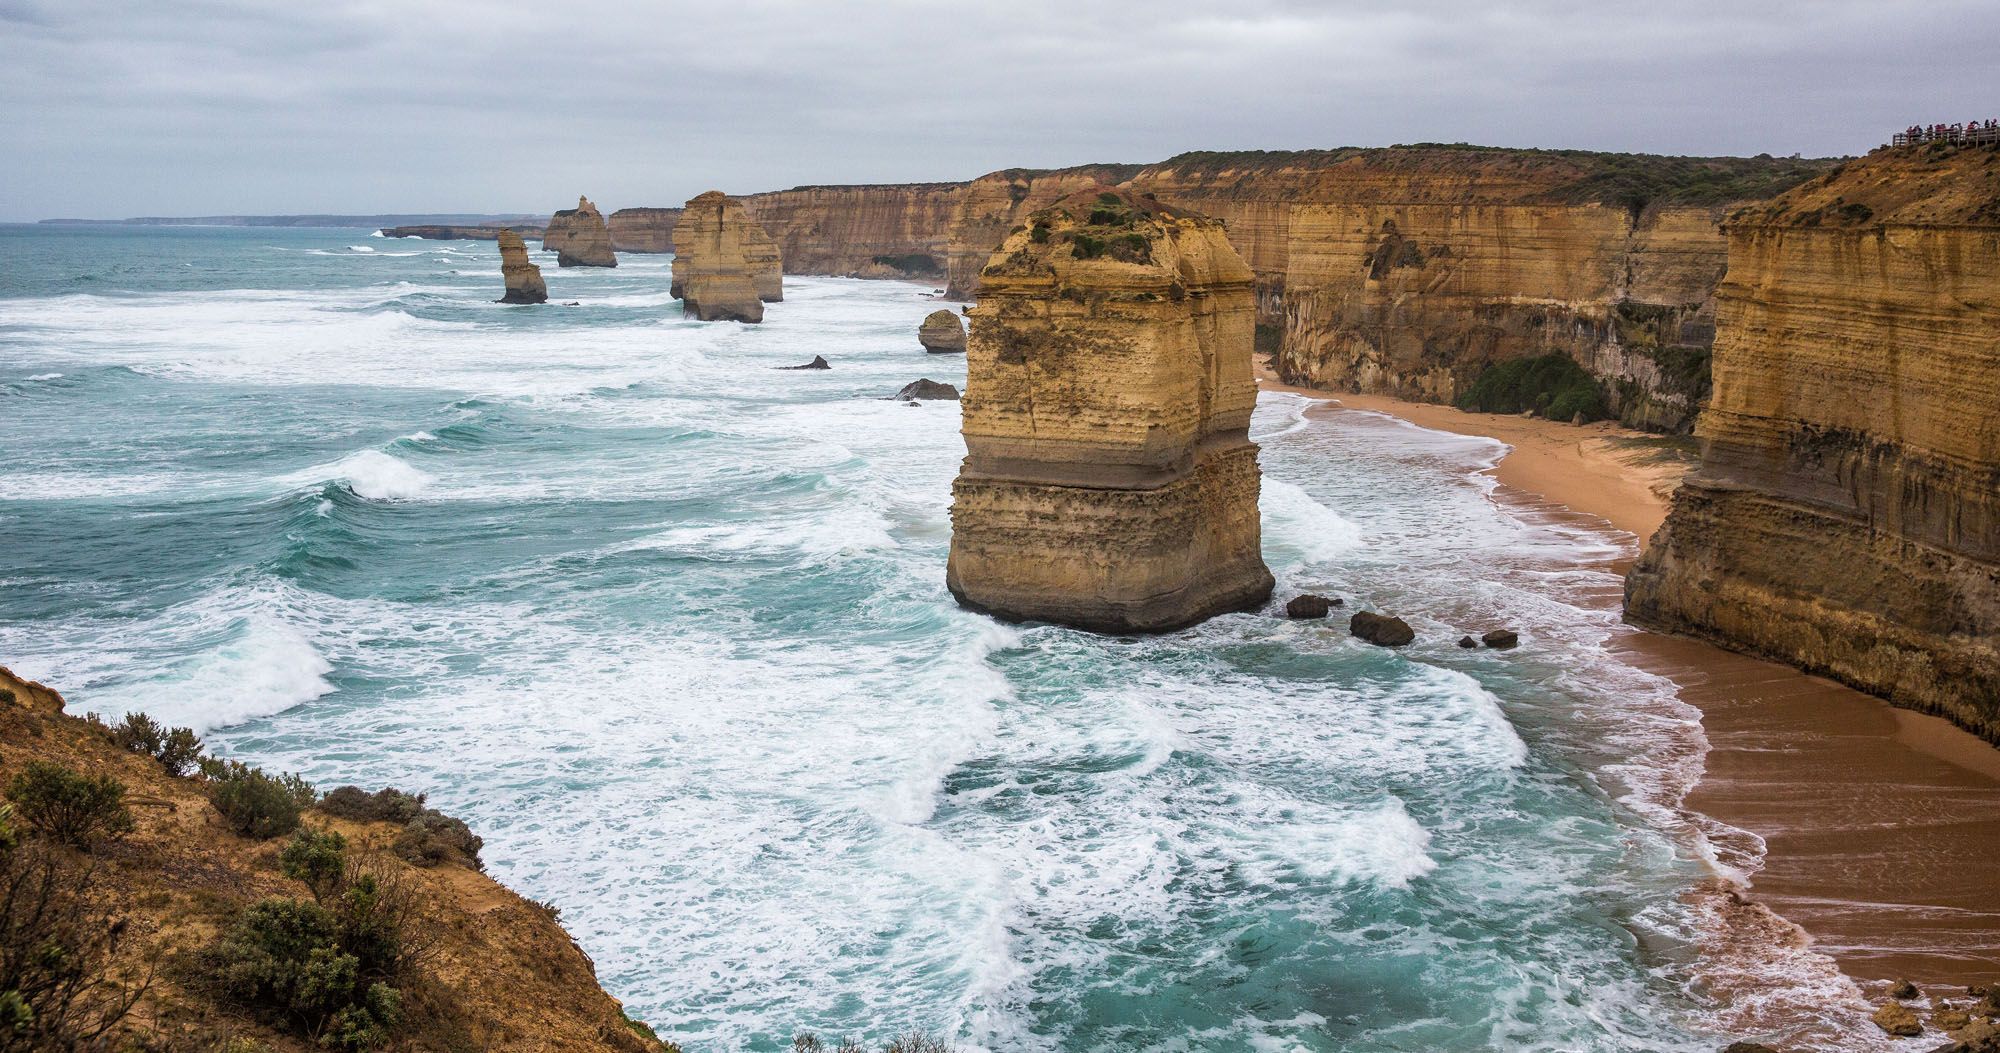 Featured image for “One Day Road Trip on the Great Ocean Road, Australia”